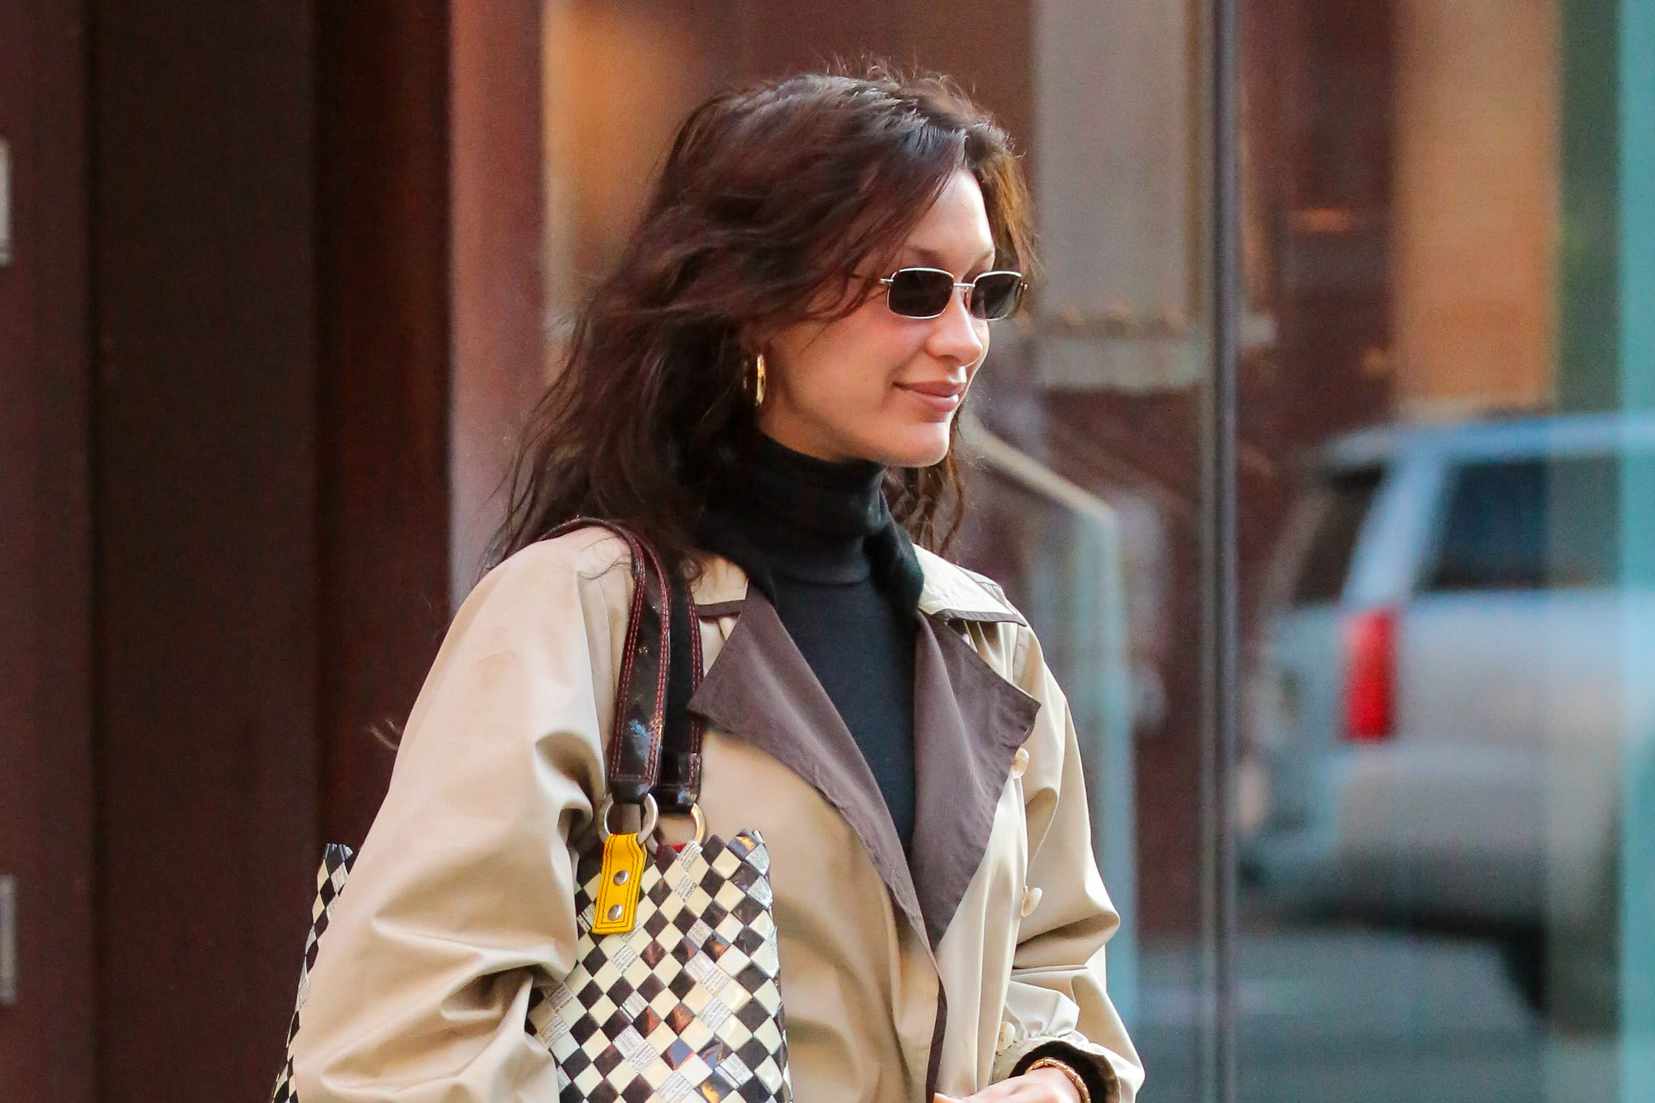 Bella Hadid wears a beige trench coat, black pants, small sunglasses, and a gold sequin bag